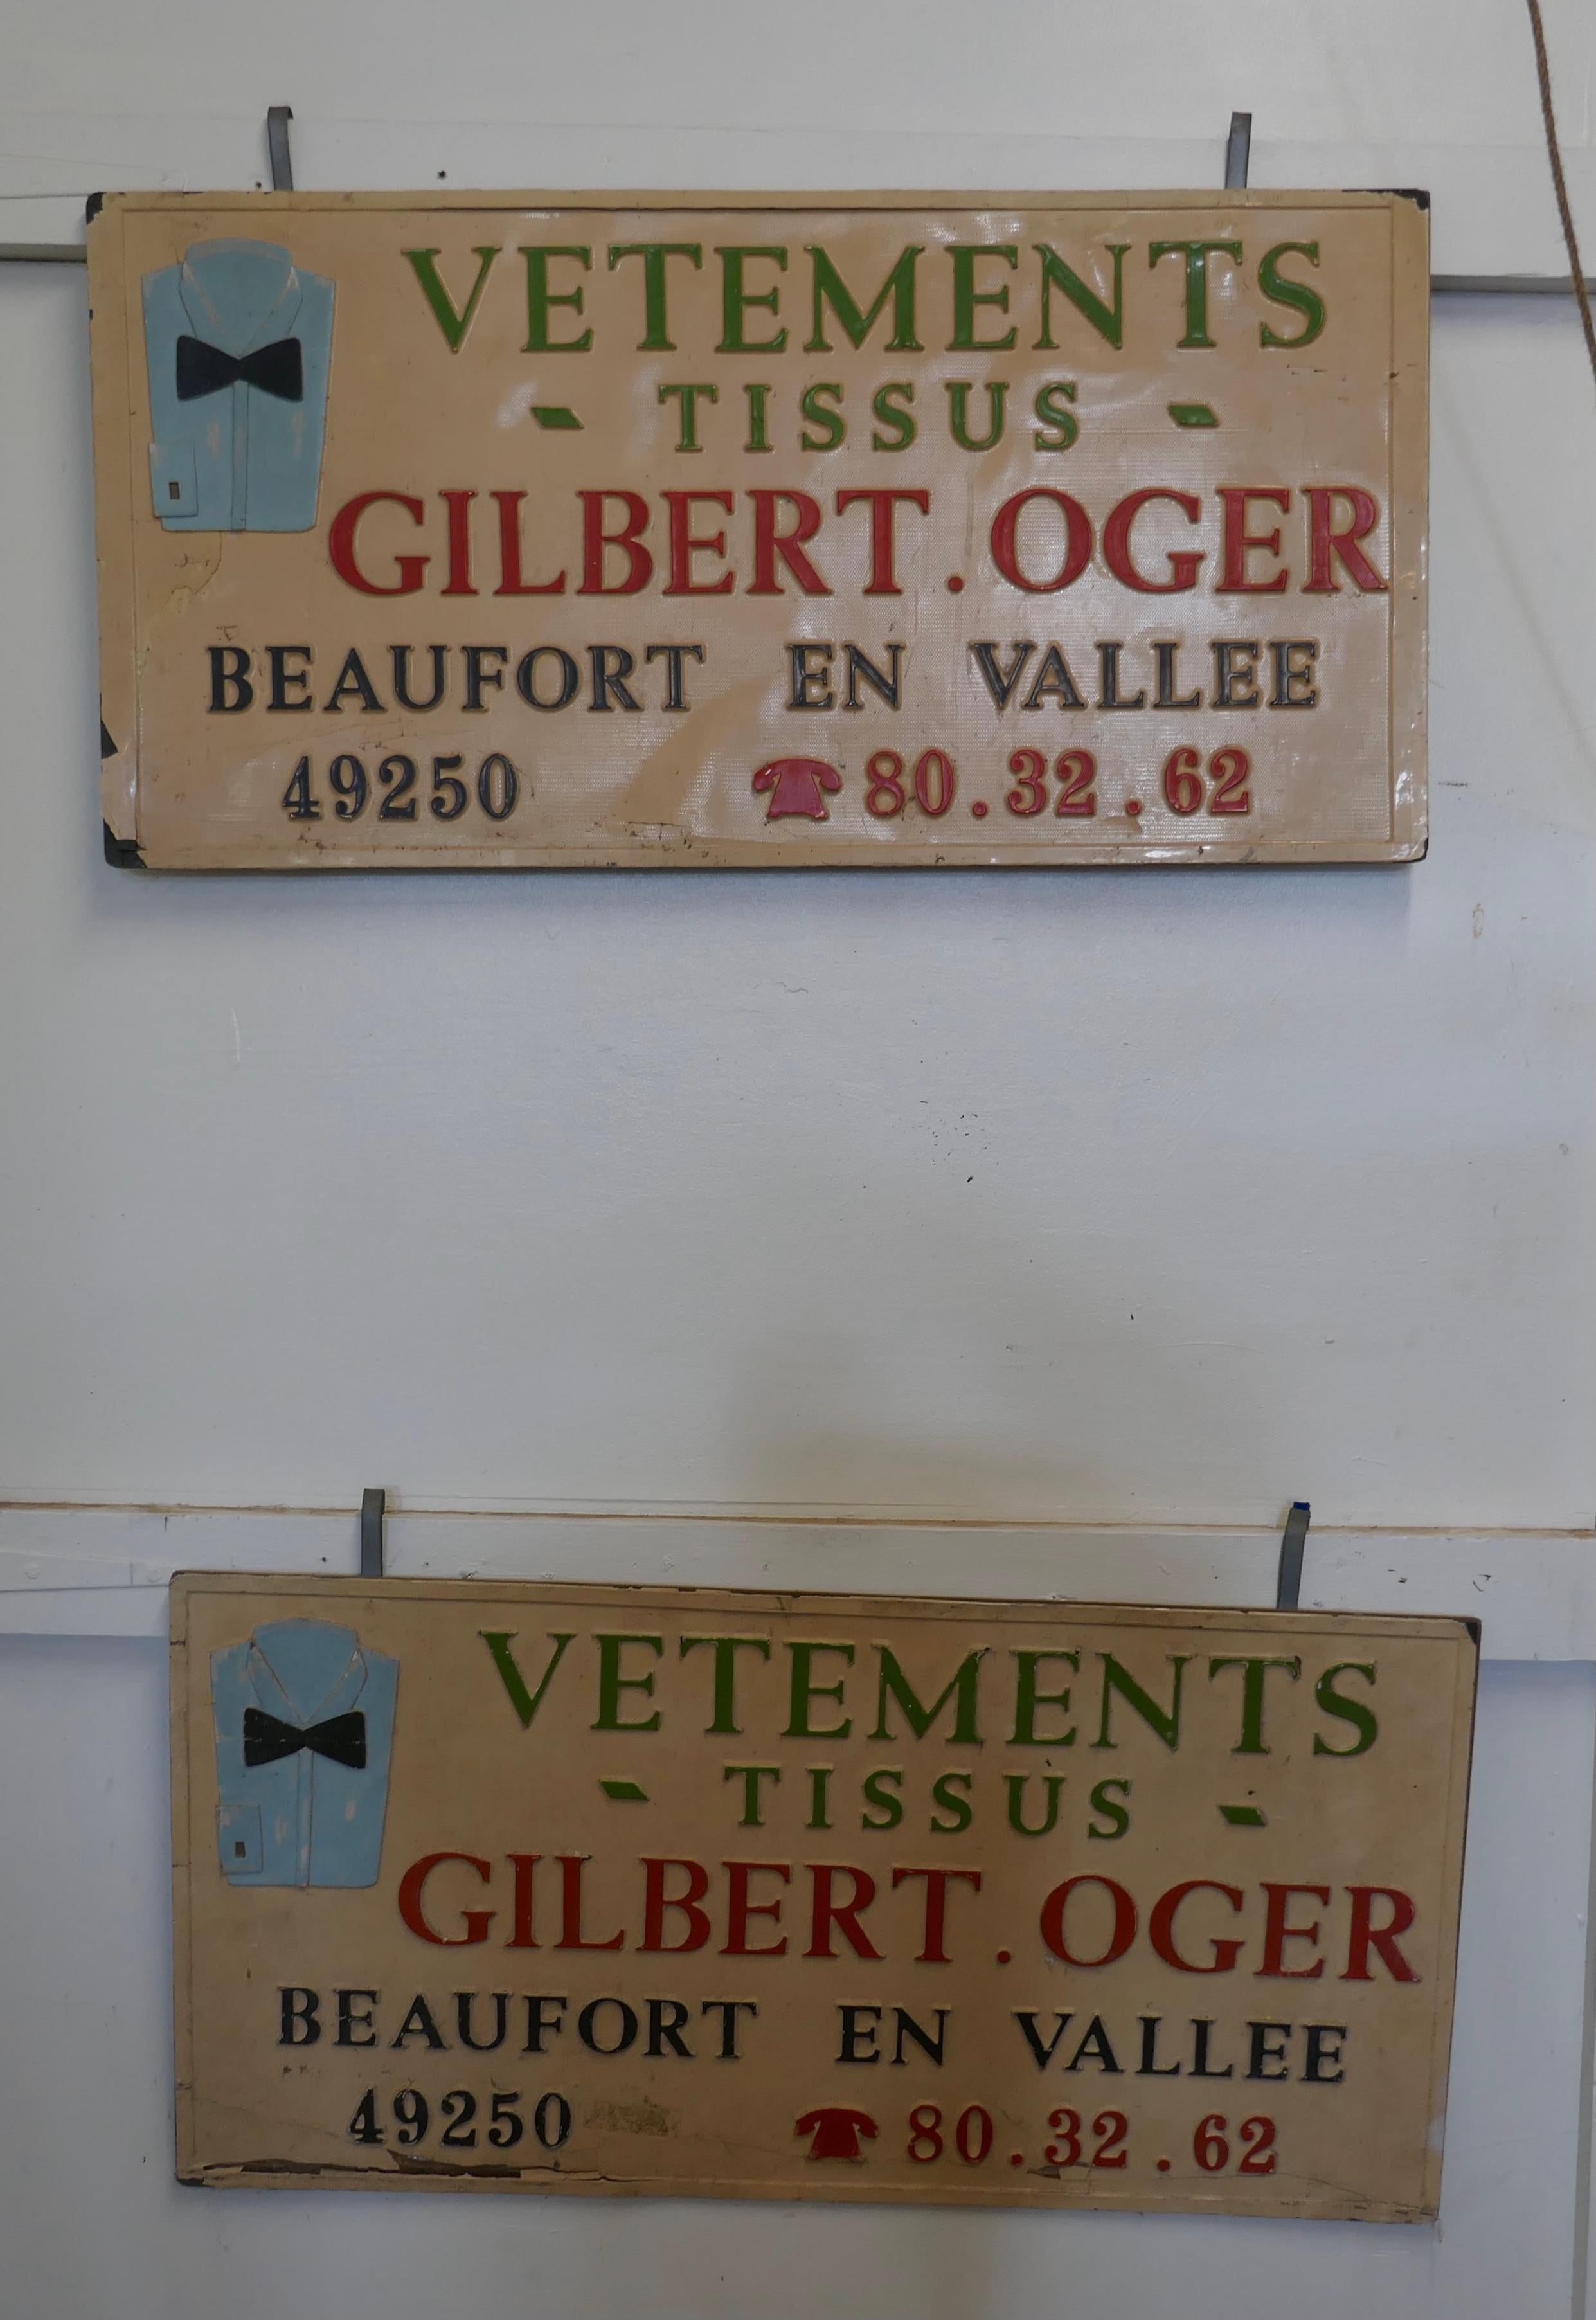 2 French Market Haberdashery stall hanging signs

These are Great pieces from a French market stall near Tours, they are hanging signs with applied advertising decoration
The signs are 20” high and 39” wide
NV187.